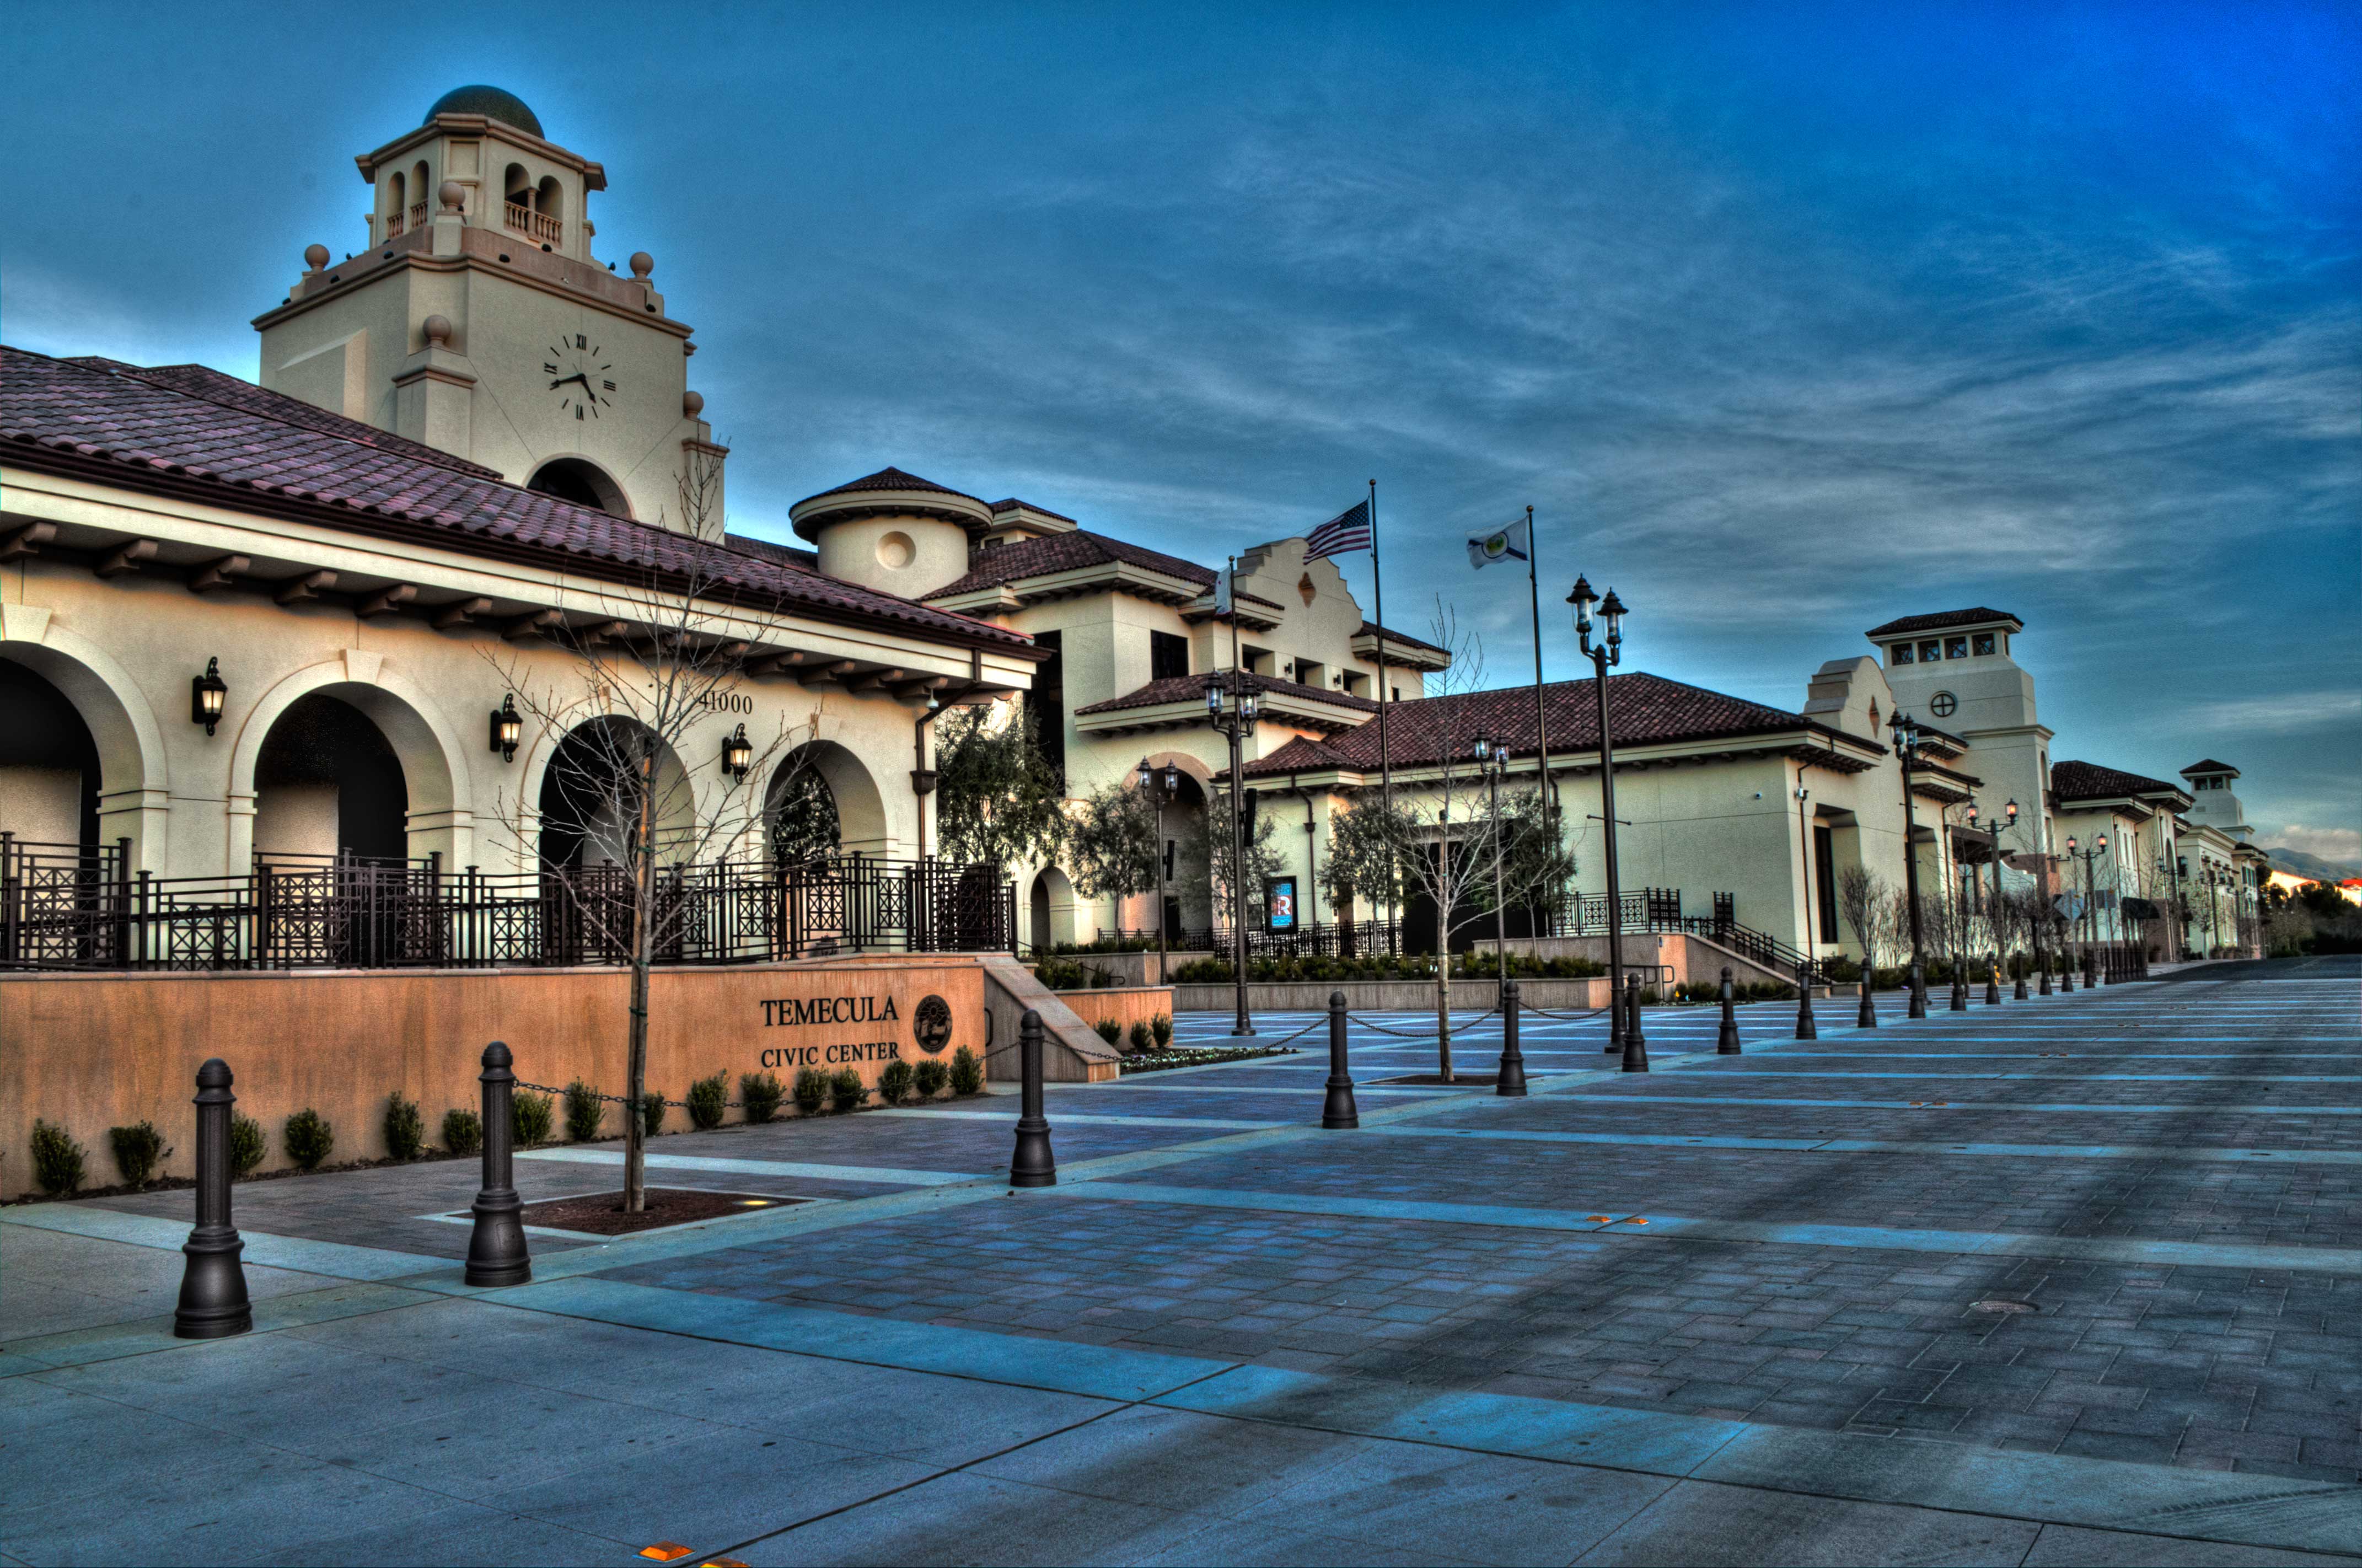 New Civic Center in Temecula